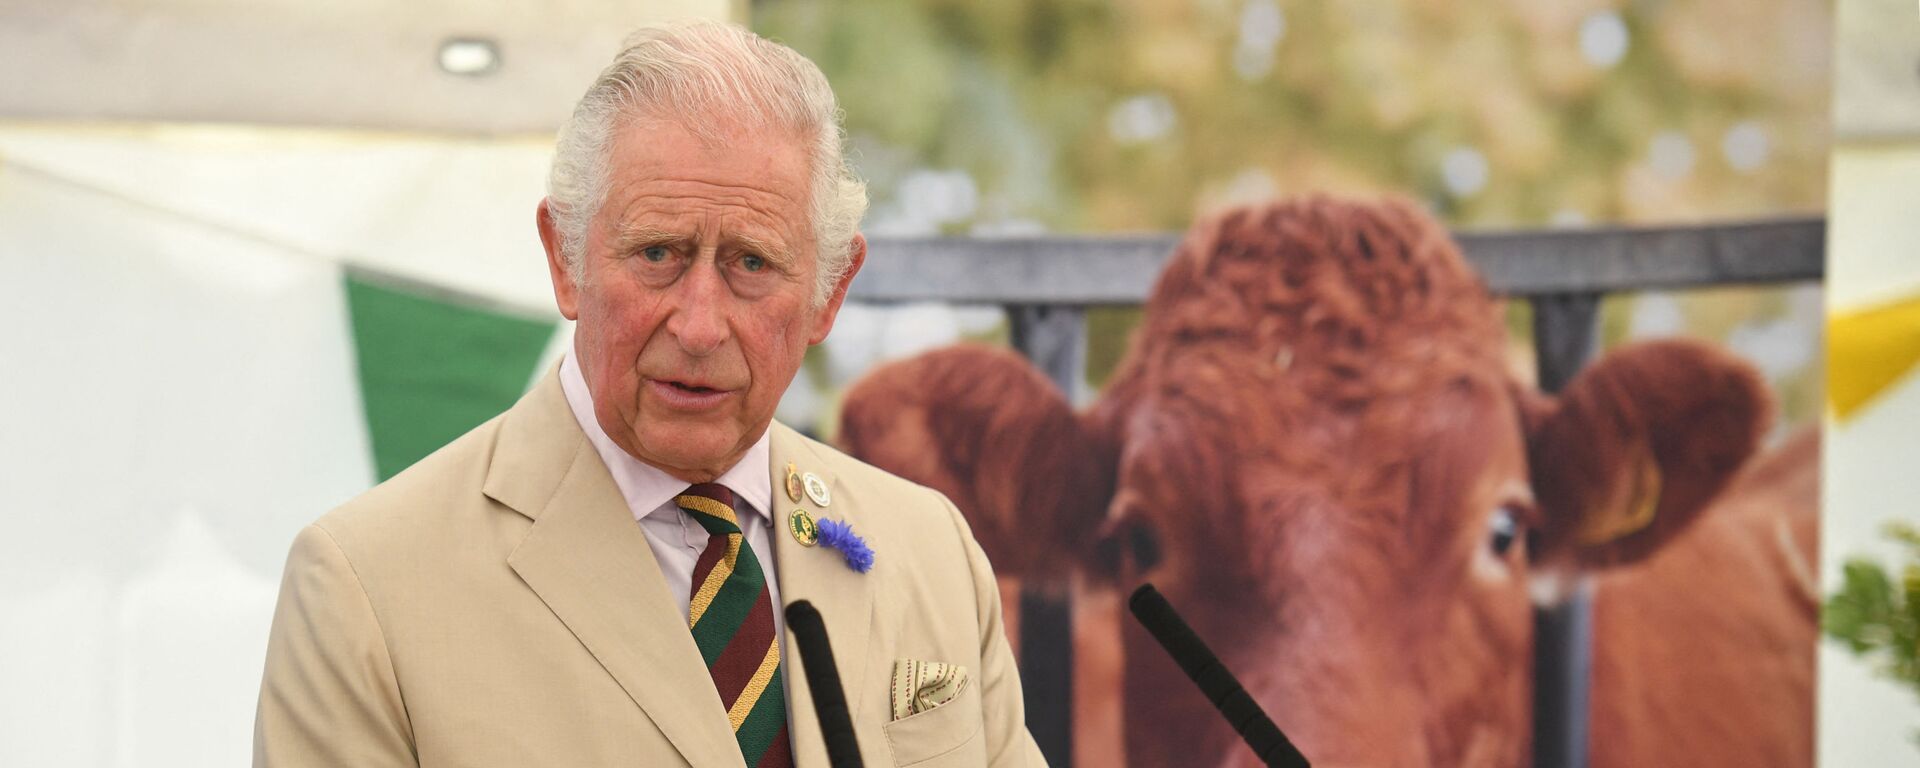 Britain's Prince Charles, Prince of Wales makes a speech during his visit to the Great Yorkshire Show in Harrogate, northern England on July 15, 2021. - Sputnik International, 1920, 06.04.2022